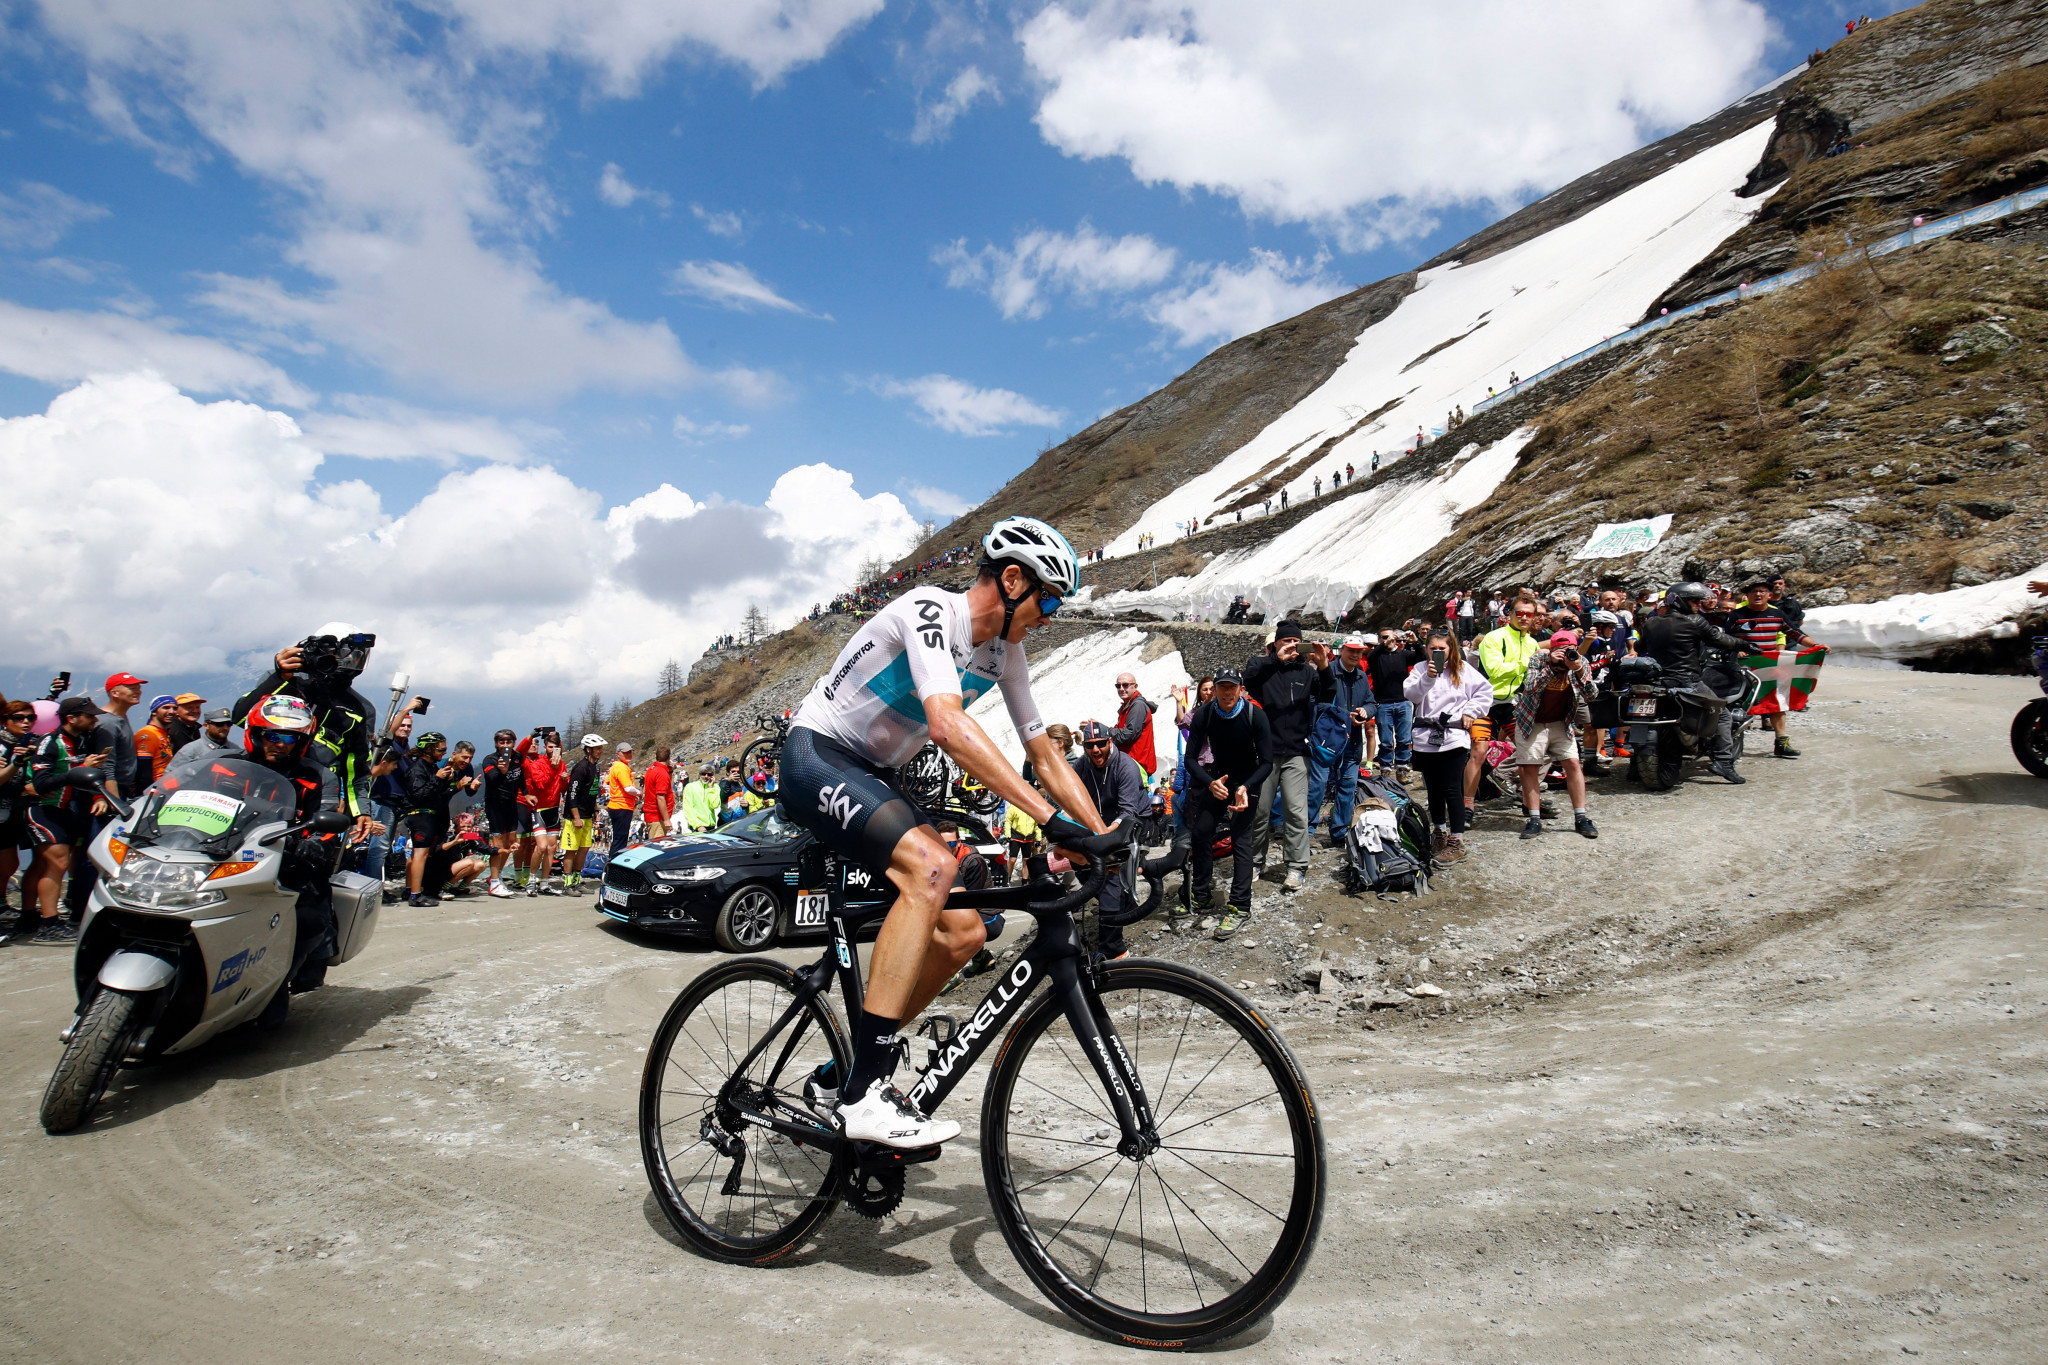 Chris Froome's performance during stage 19 of the Giro d'Italia has been met with a suspicious response ©Getty Images